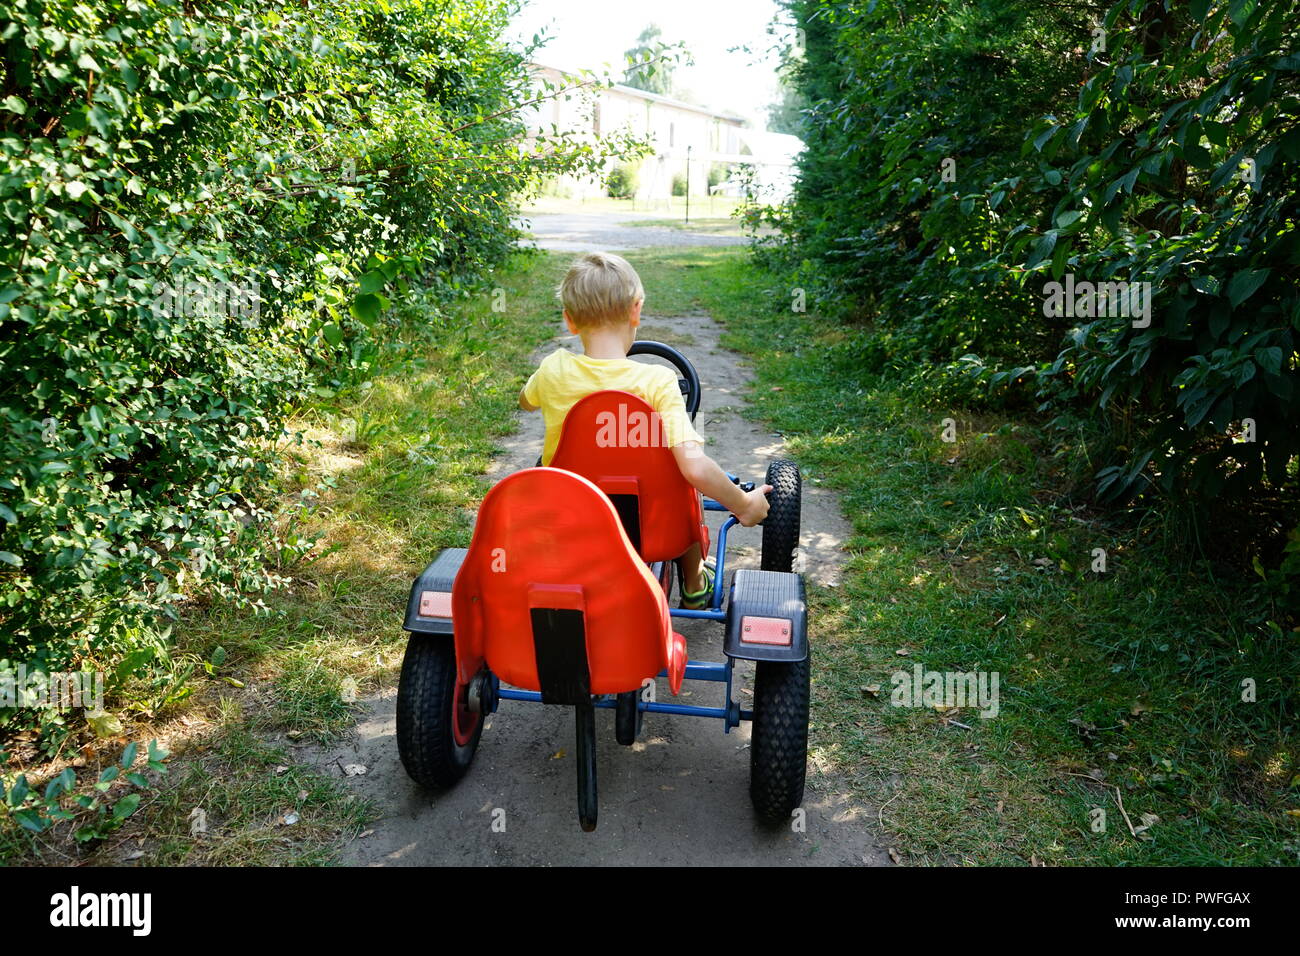 Active blond kid boy driving pedal toy car in green garden, outdoors. Stock Photo